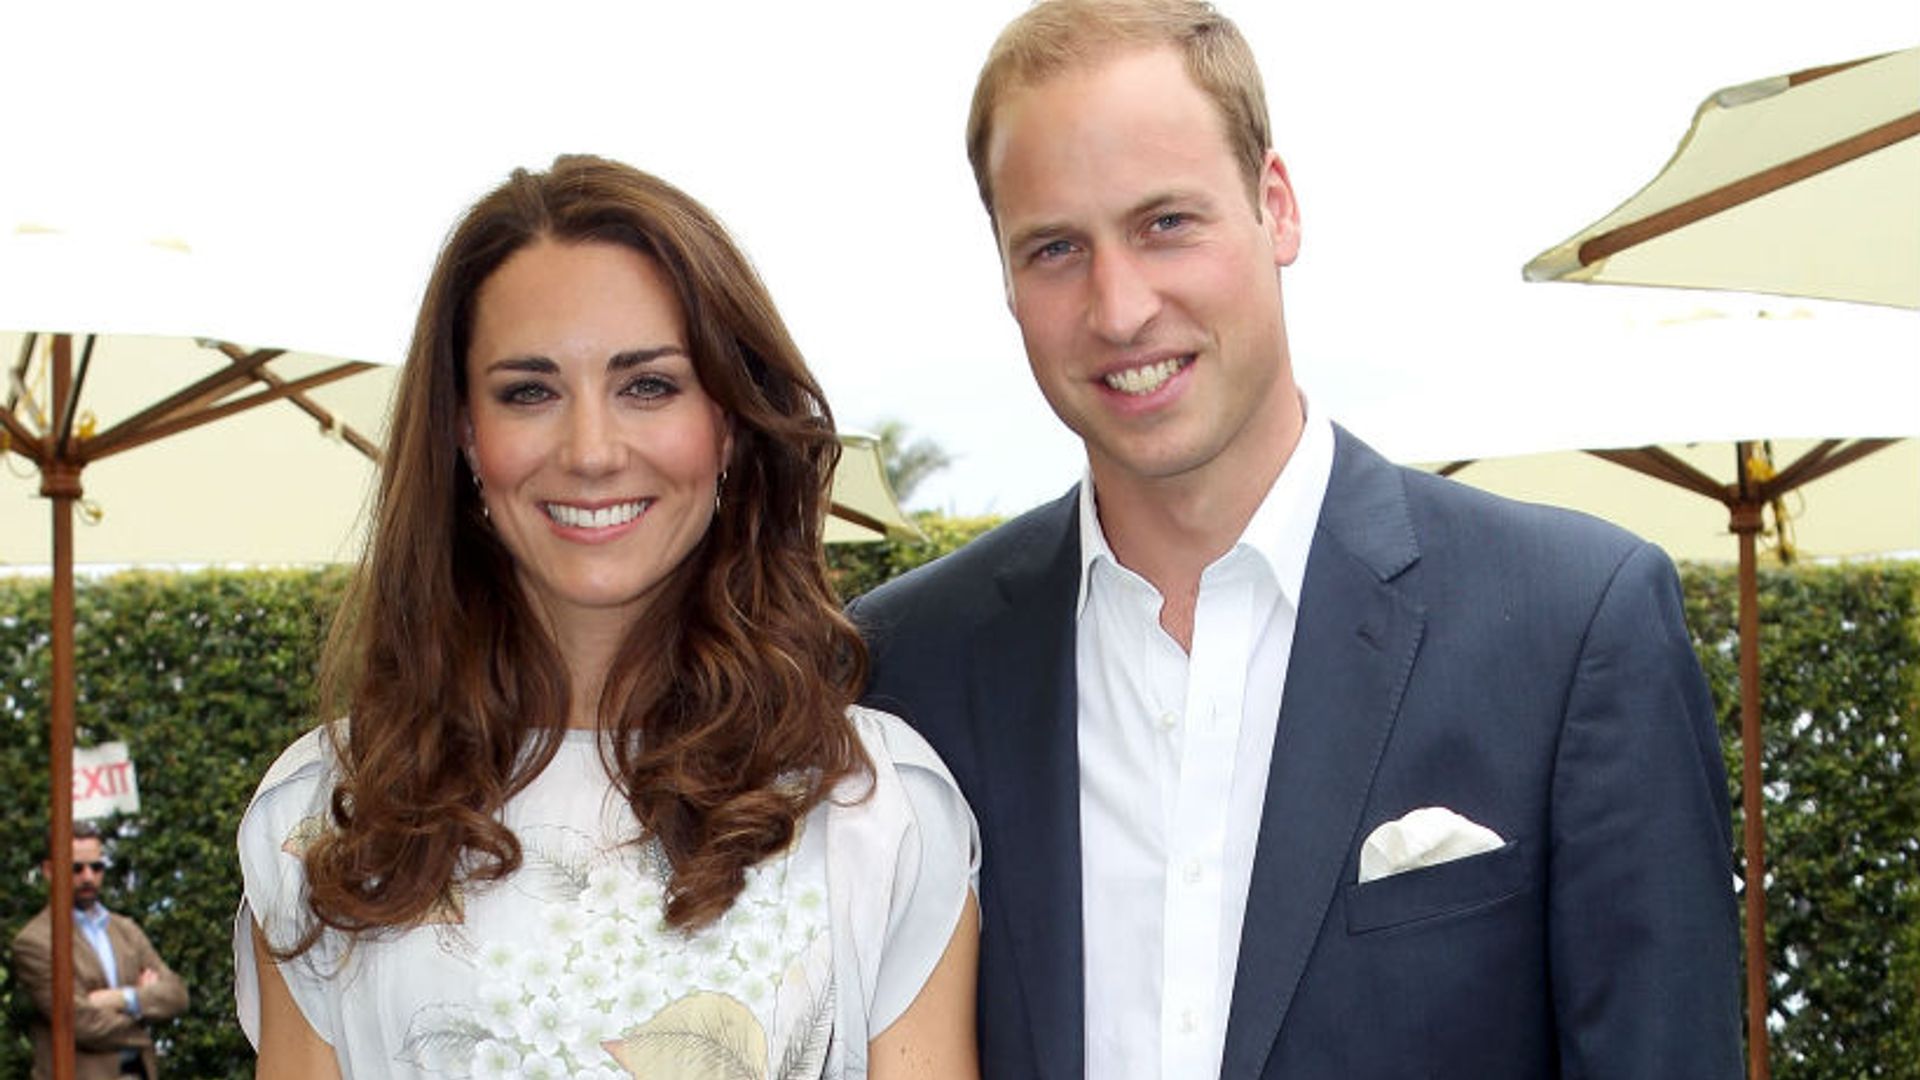 Kate Middleton and Prince William pictured showing rare public display of affection | HELLO!